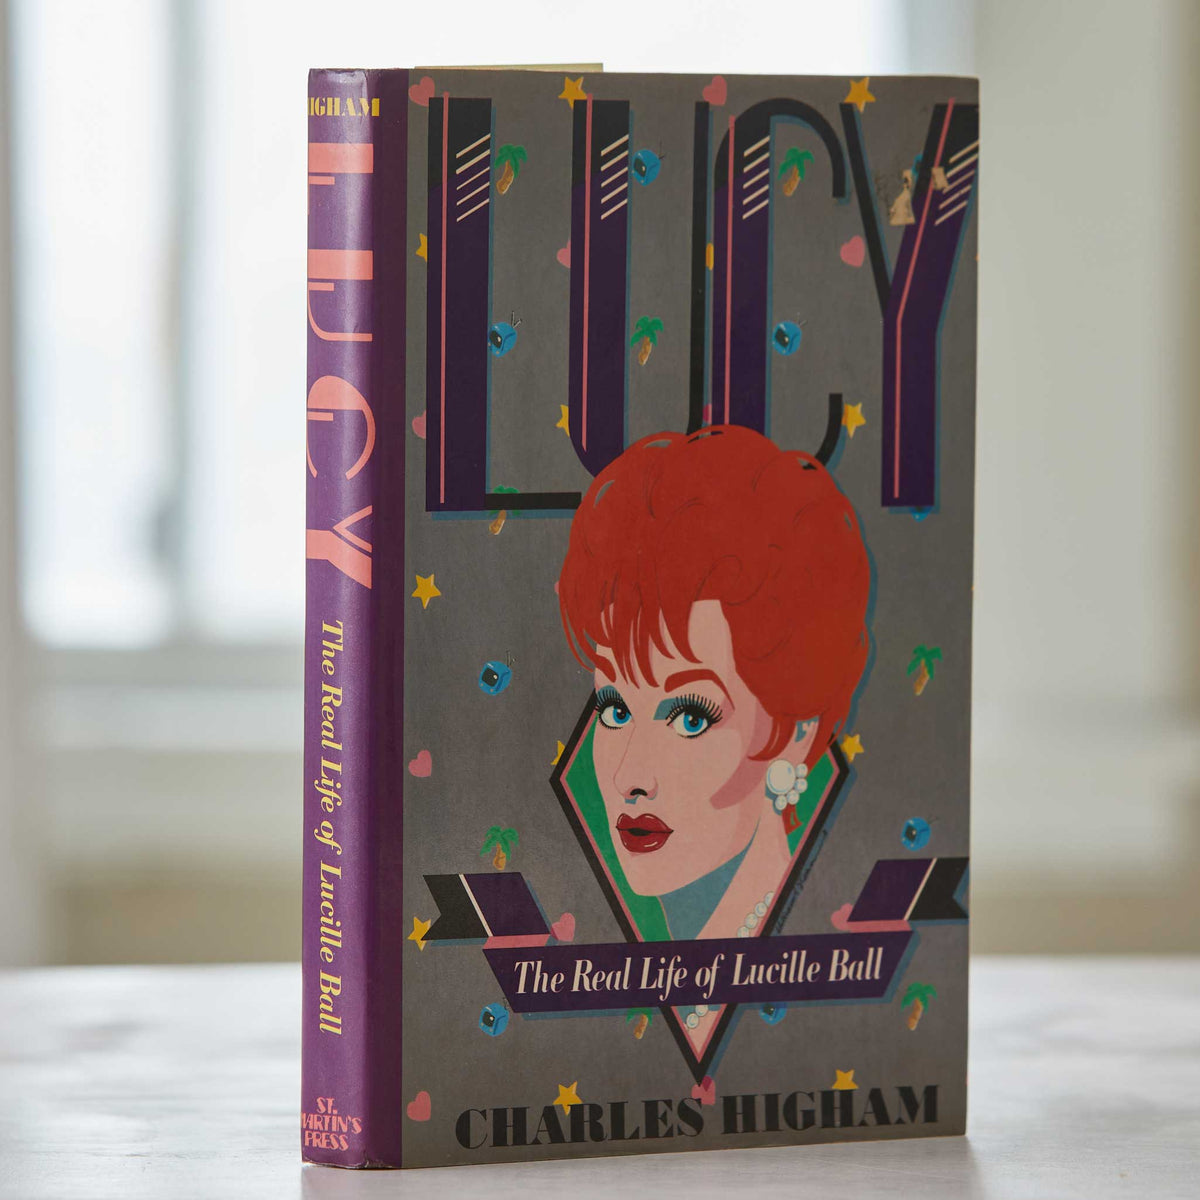 LUCY, THE REAL LIFE OF LUCILLE BALL